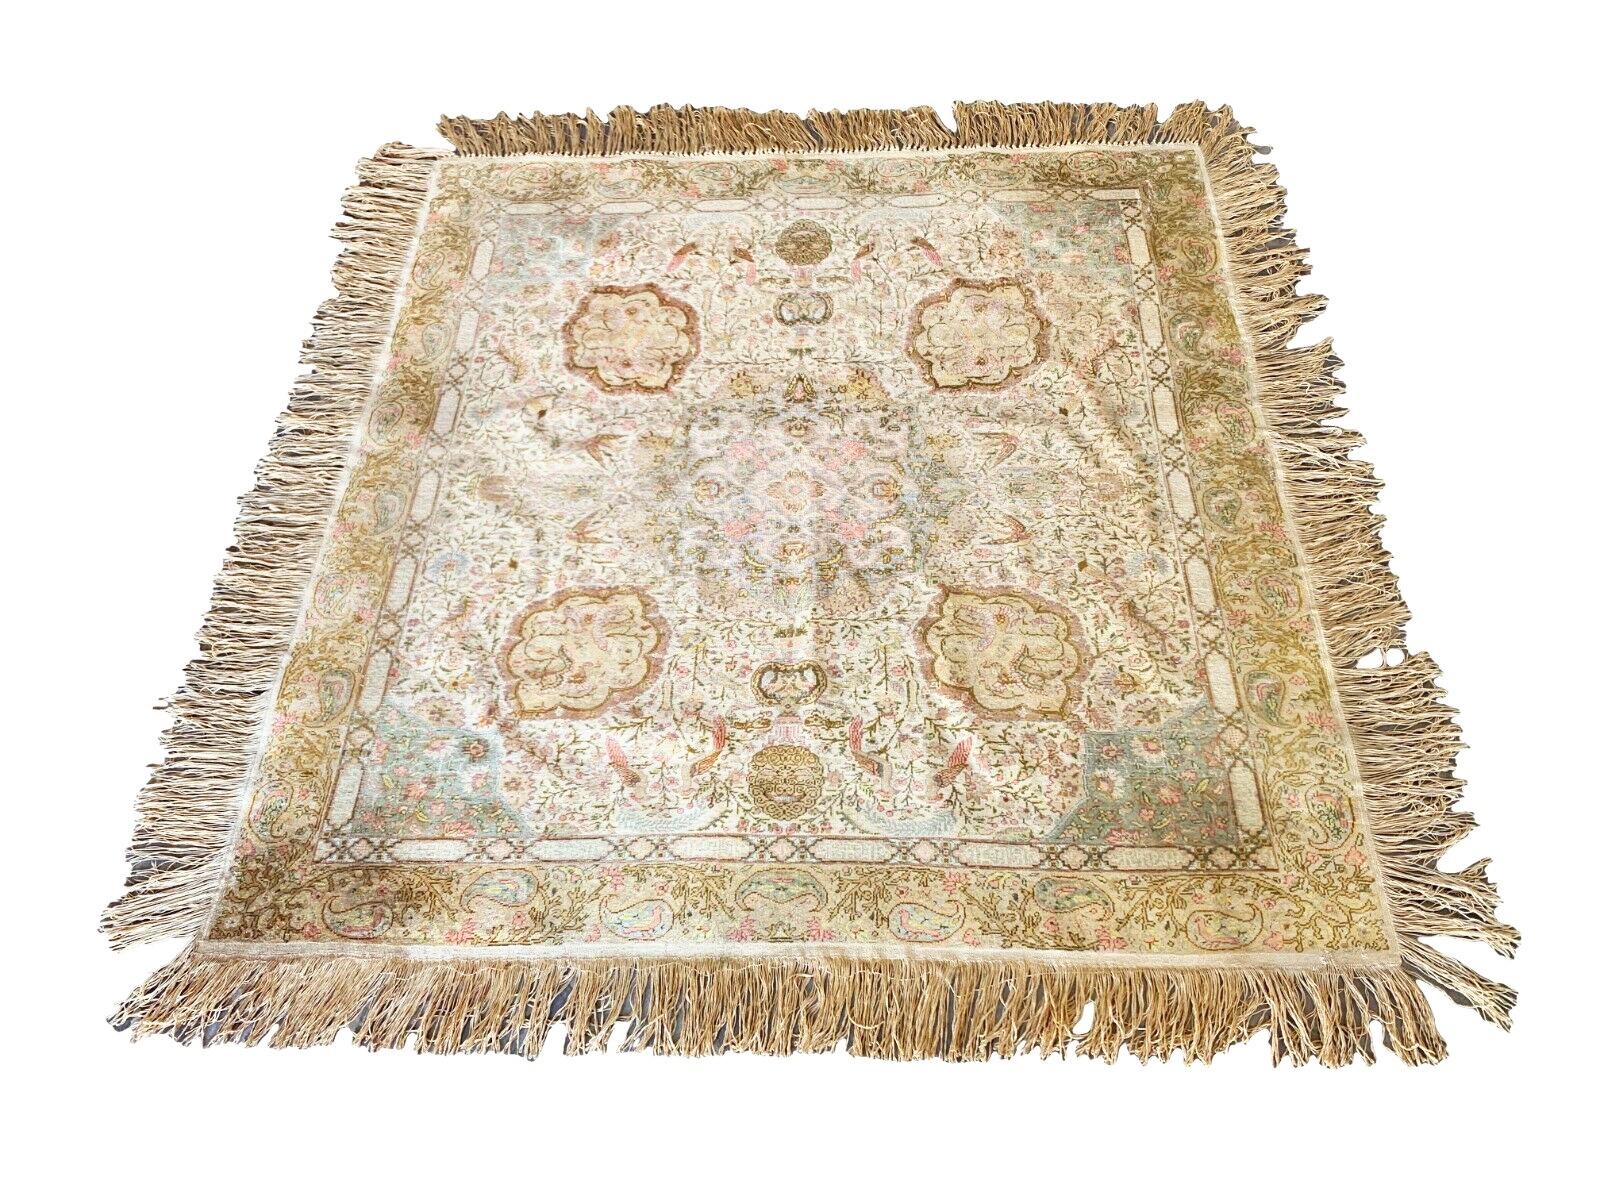 Hand-knotted, silk zero pile on a cotton foundation.

Circa 1900

Dimensions: 4'10